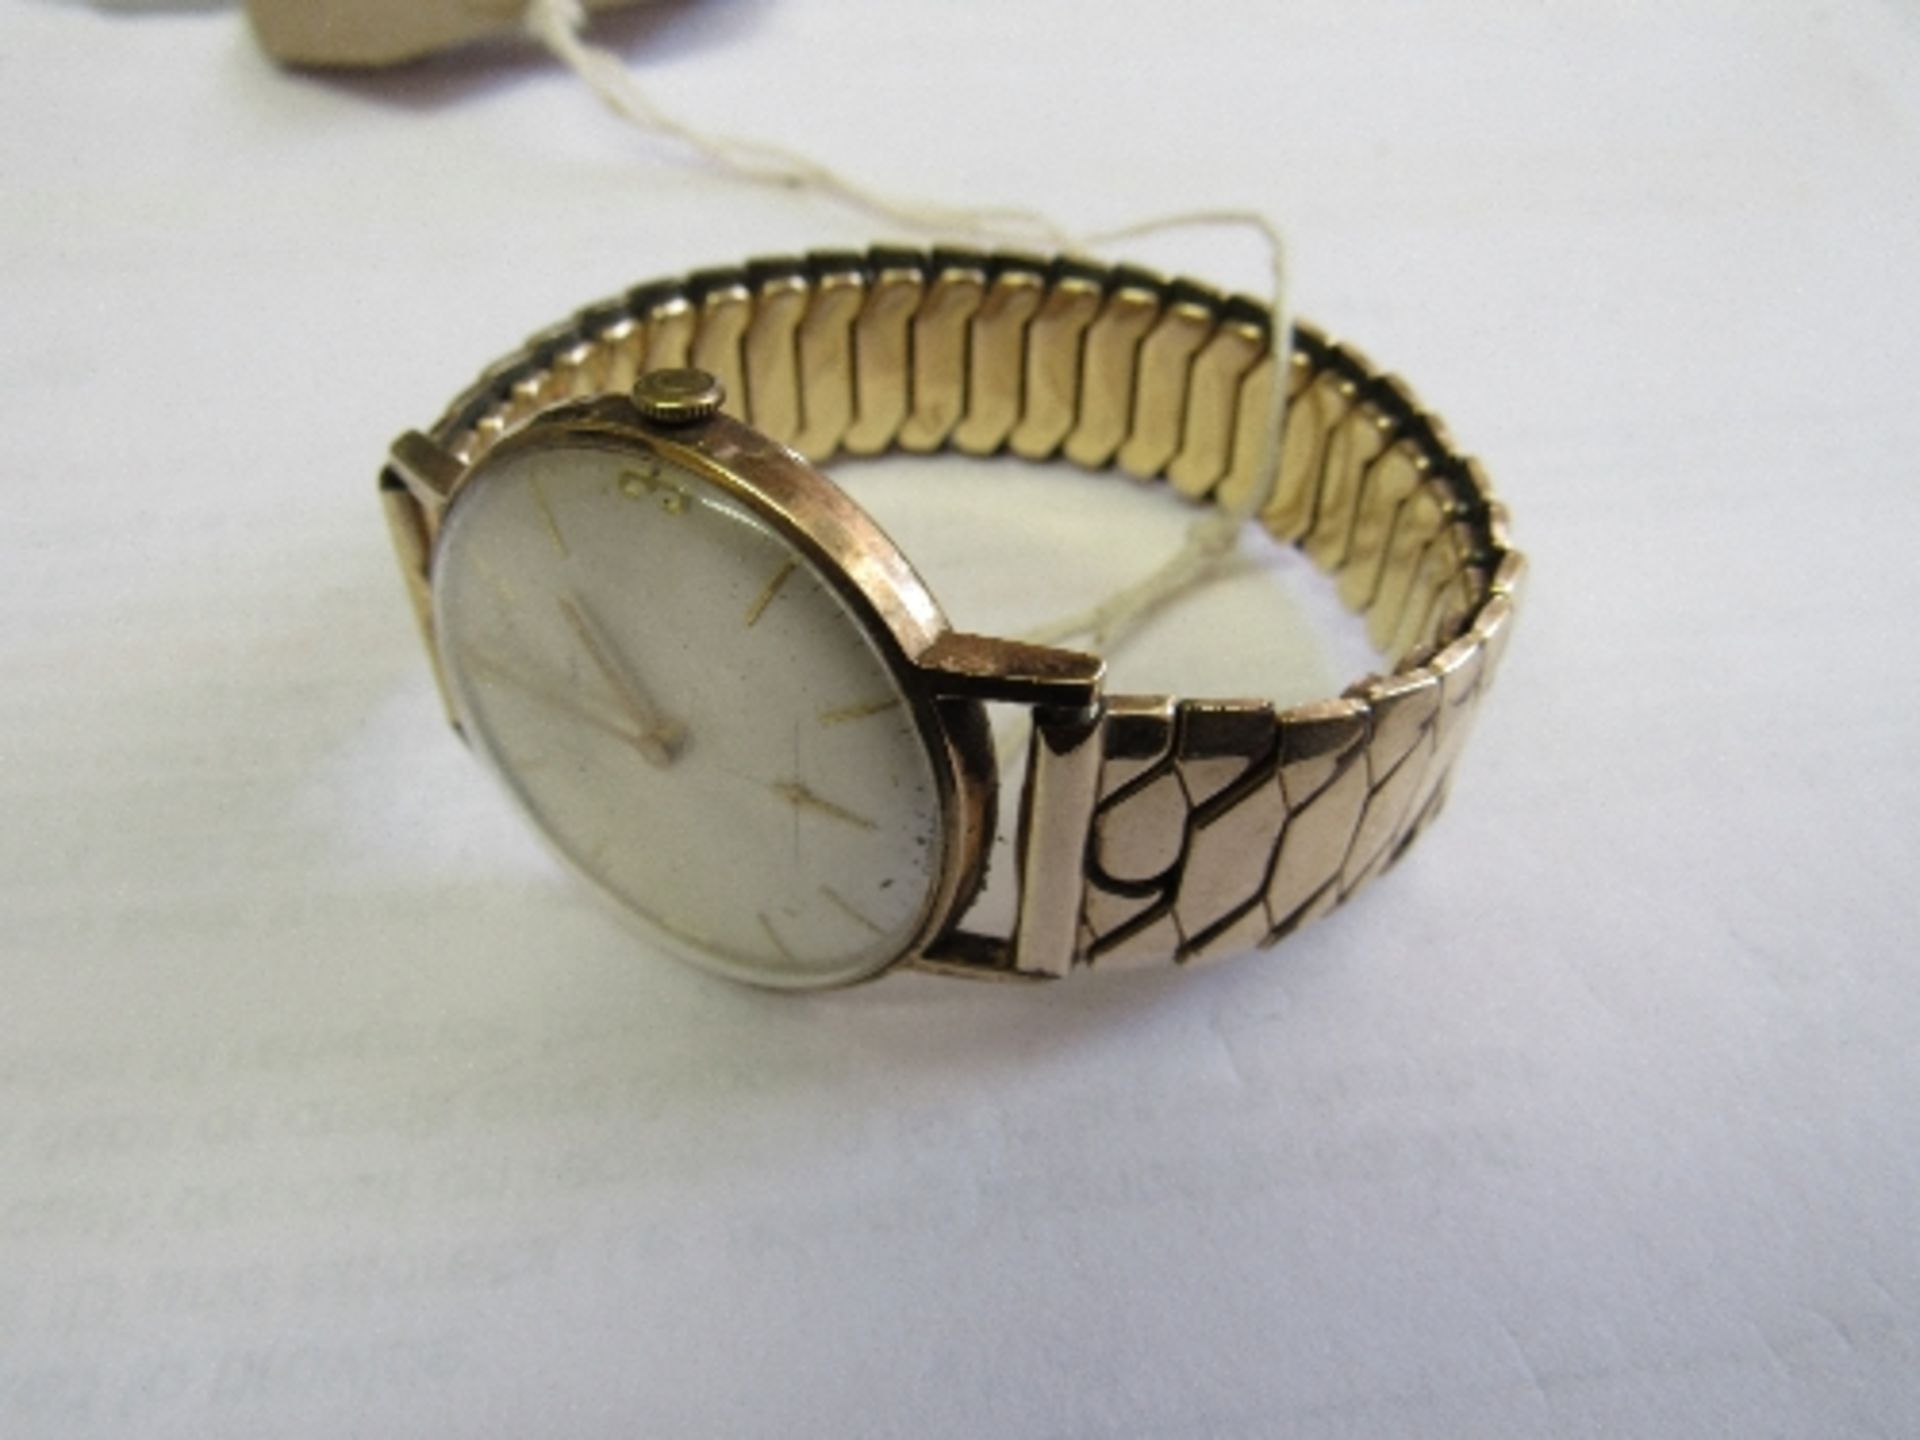 Certina rolled gold gentleman's wrist watch with gold coloured expanding strap, inscribed on